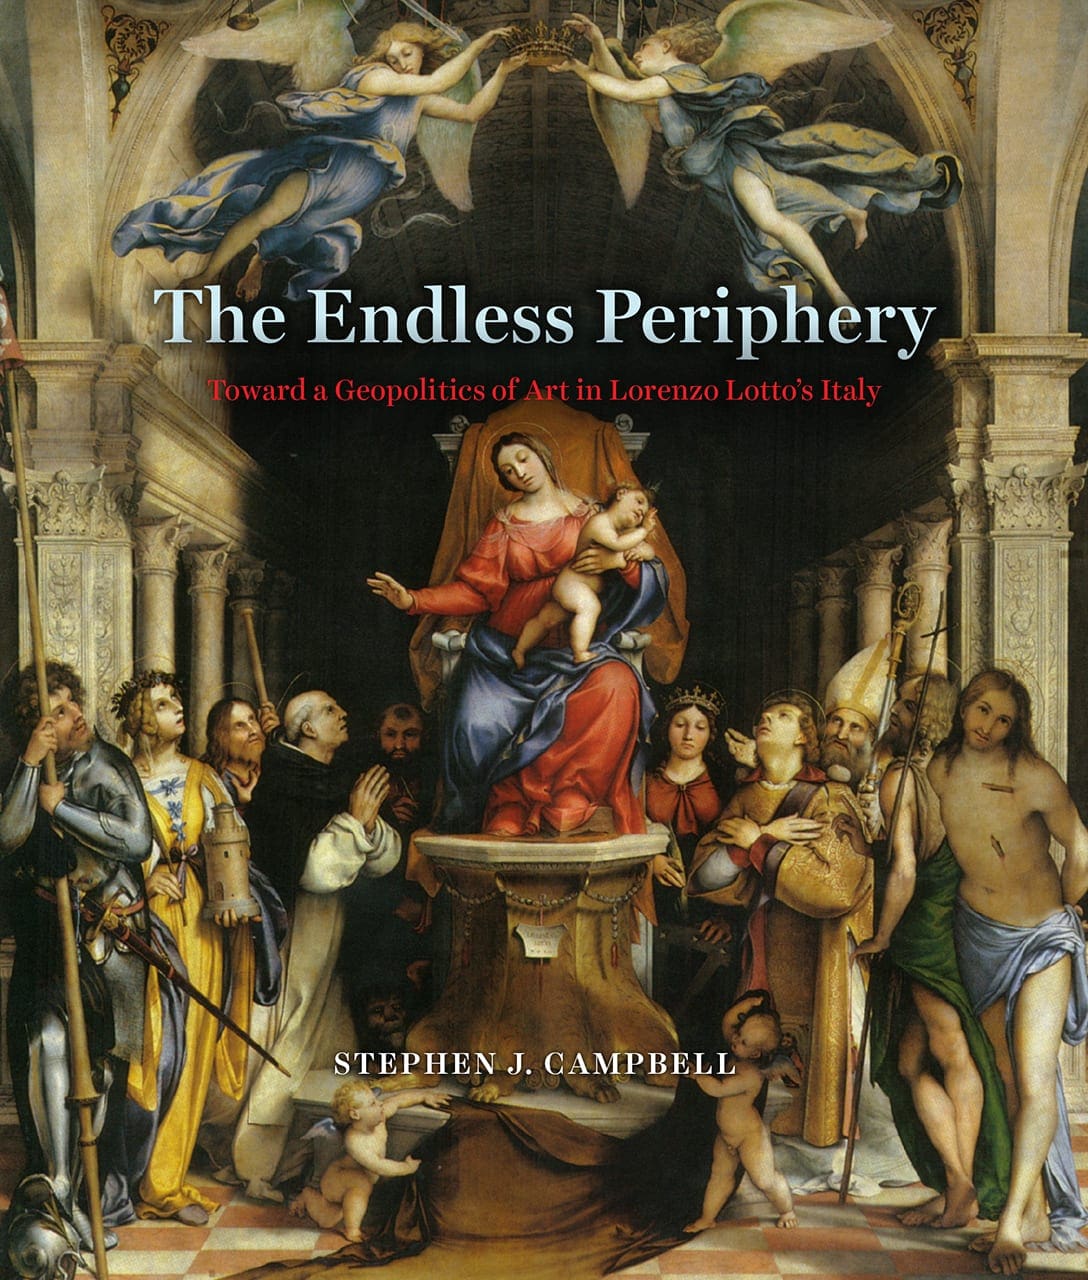 The Endless Periphery: Towards a Geopolitics of Art in Lorenzo Lotto’s Italy